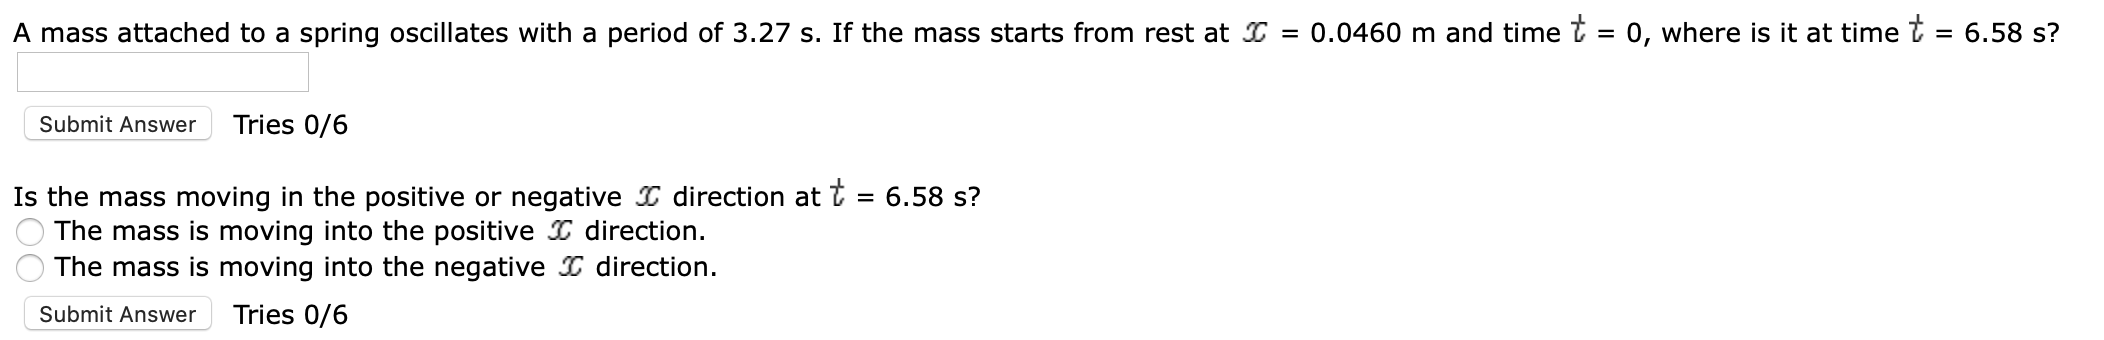 A mass attached to a spring oscillates with a period of 3.27 s. If the mass starts from rest at I = 0.0460 m and time t = 0, where is it at timet = 6.58 s?
Tries 0/6
Submit Answer
Is the mass moving in the positive or negative direction at
The mass is moving into the positive direction
The mass is moving into the negative D direction
6.58 s?
Tries 0/6
Submit Answer
